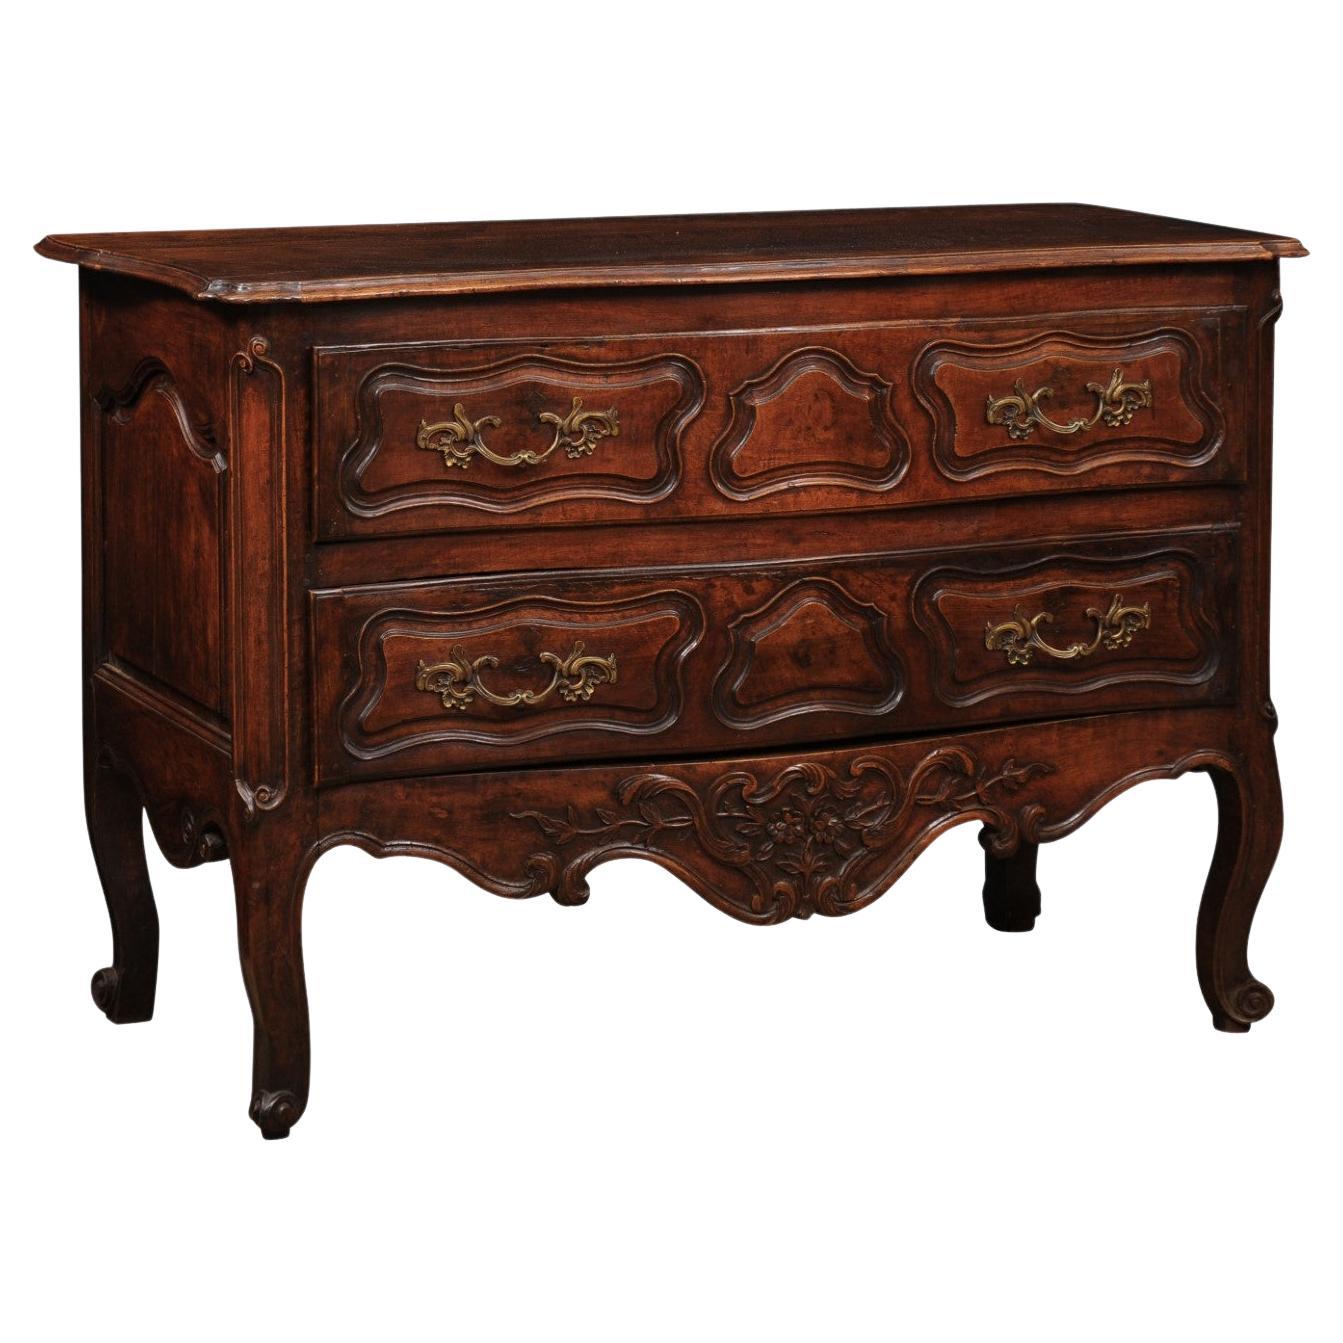  French Mid 18th Century Louis XV Walnut Commode with 2 Drawers For Sale